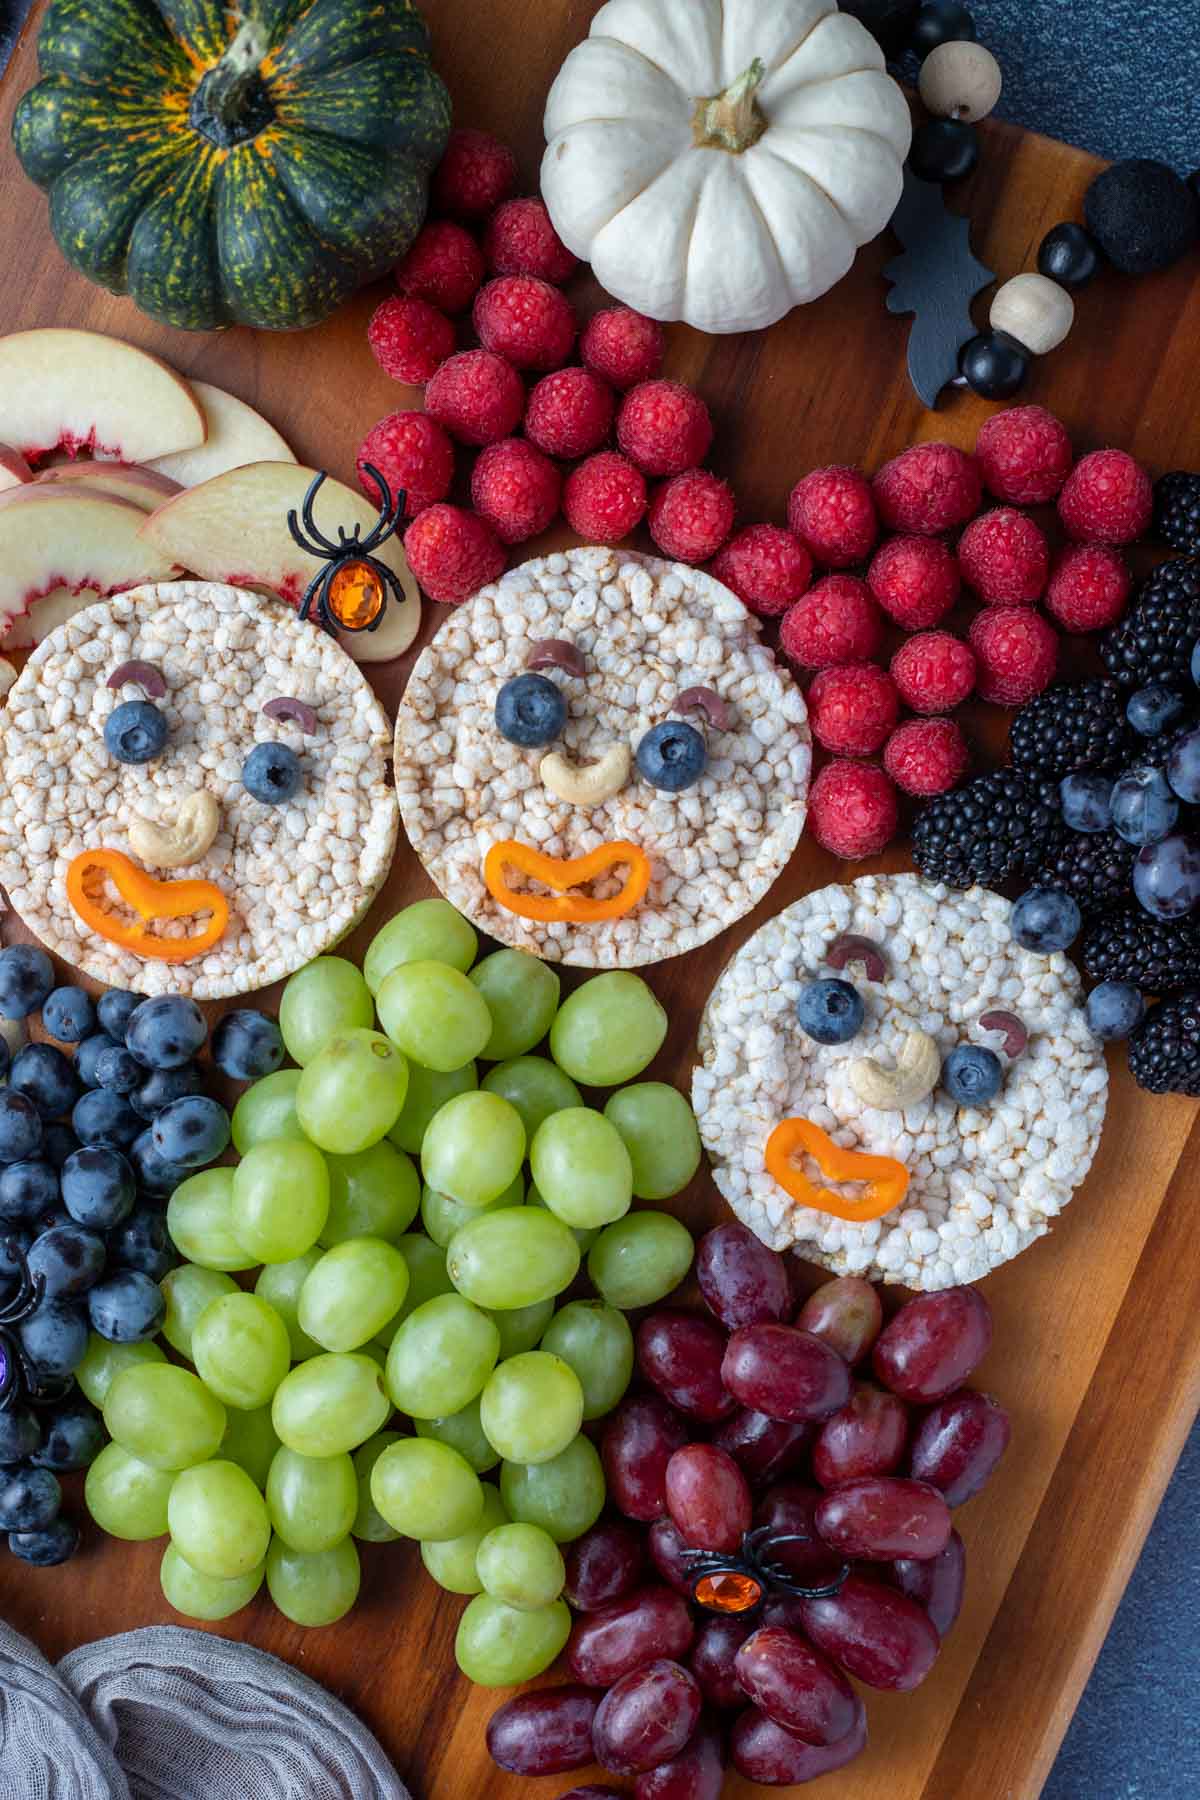 Hocus Pocus snack board: Sanderson Sisters made with rice cakes and fruit.
